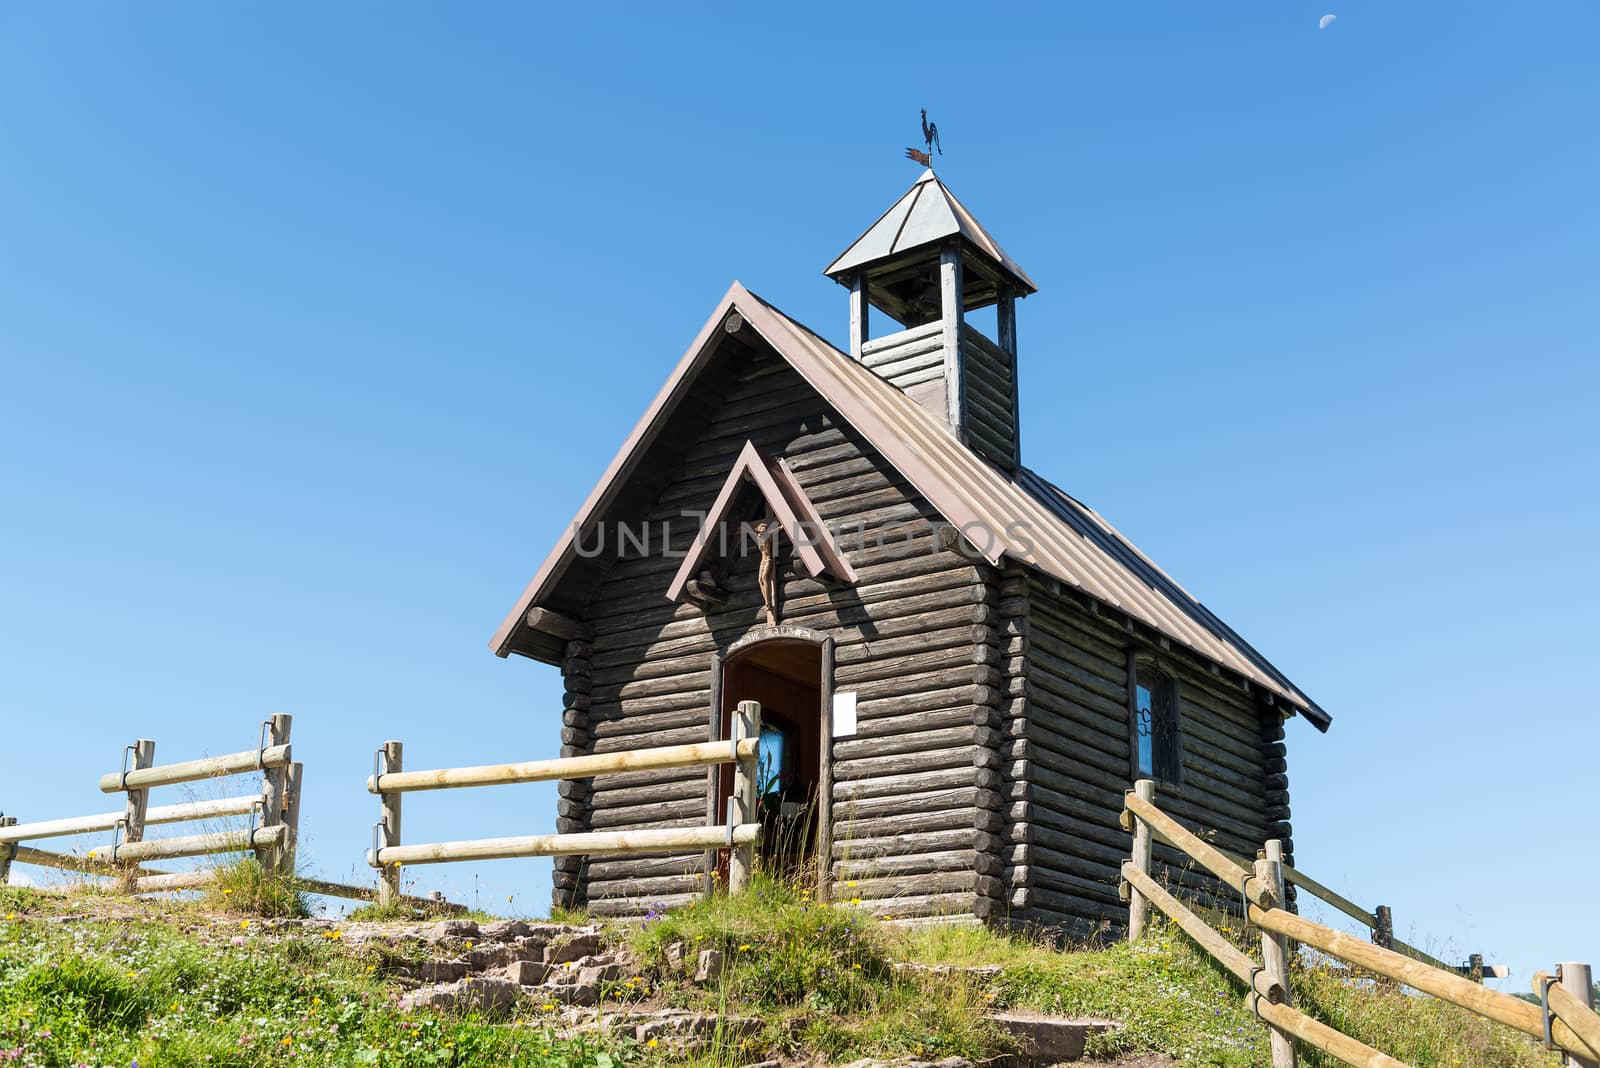 church at the end of the mountain path on the hill in a summer day